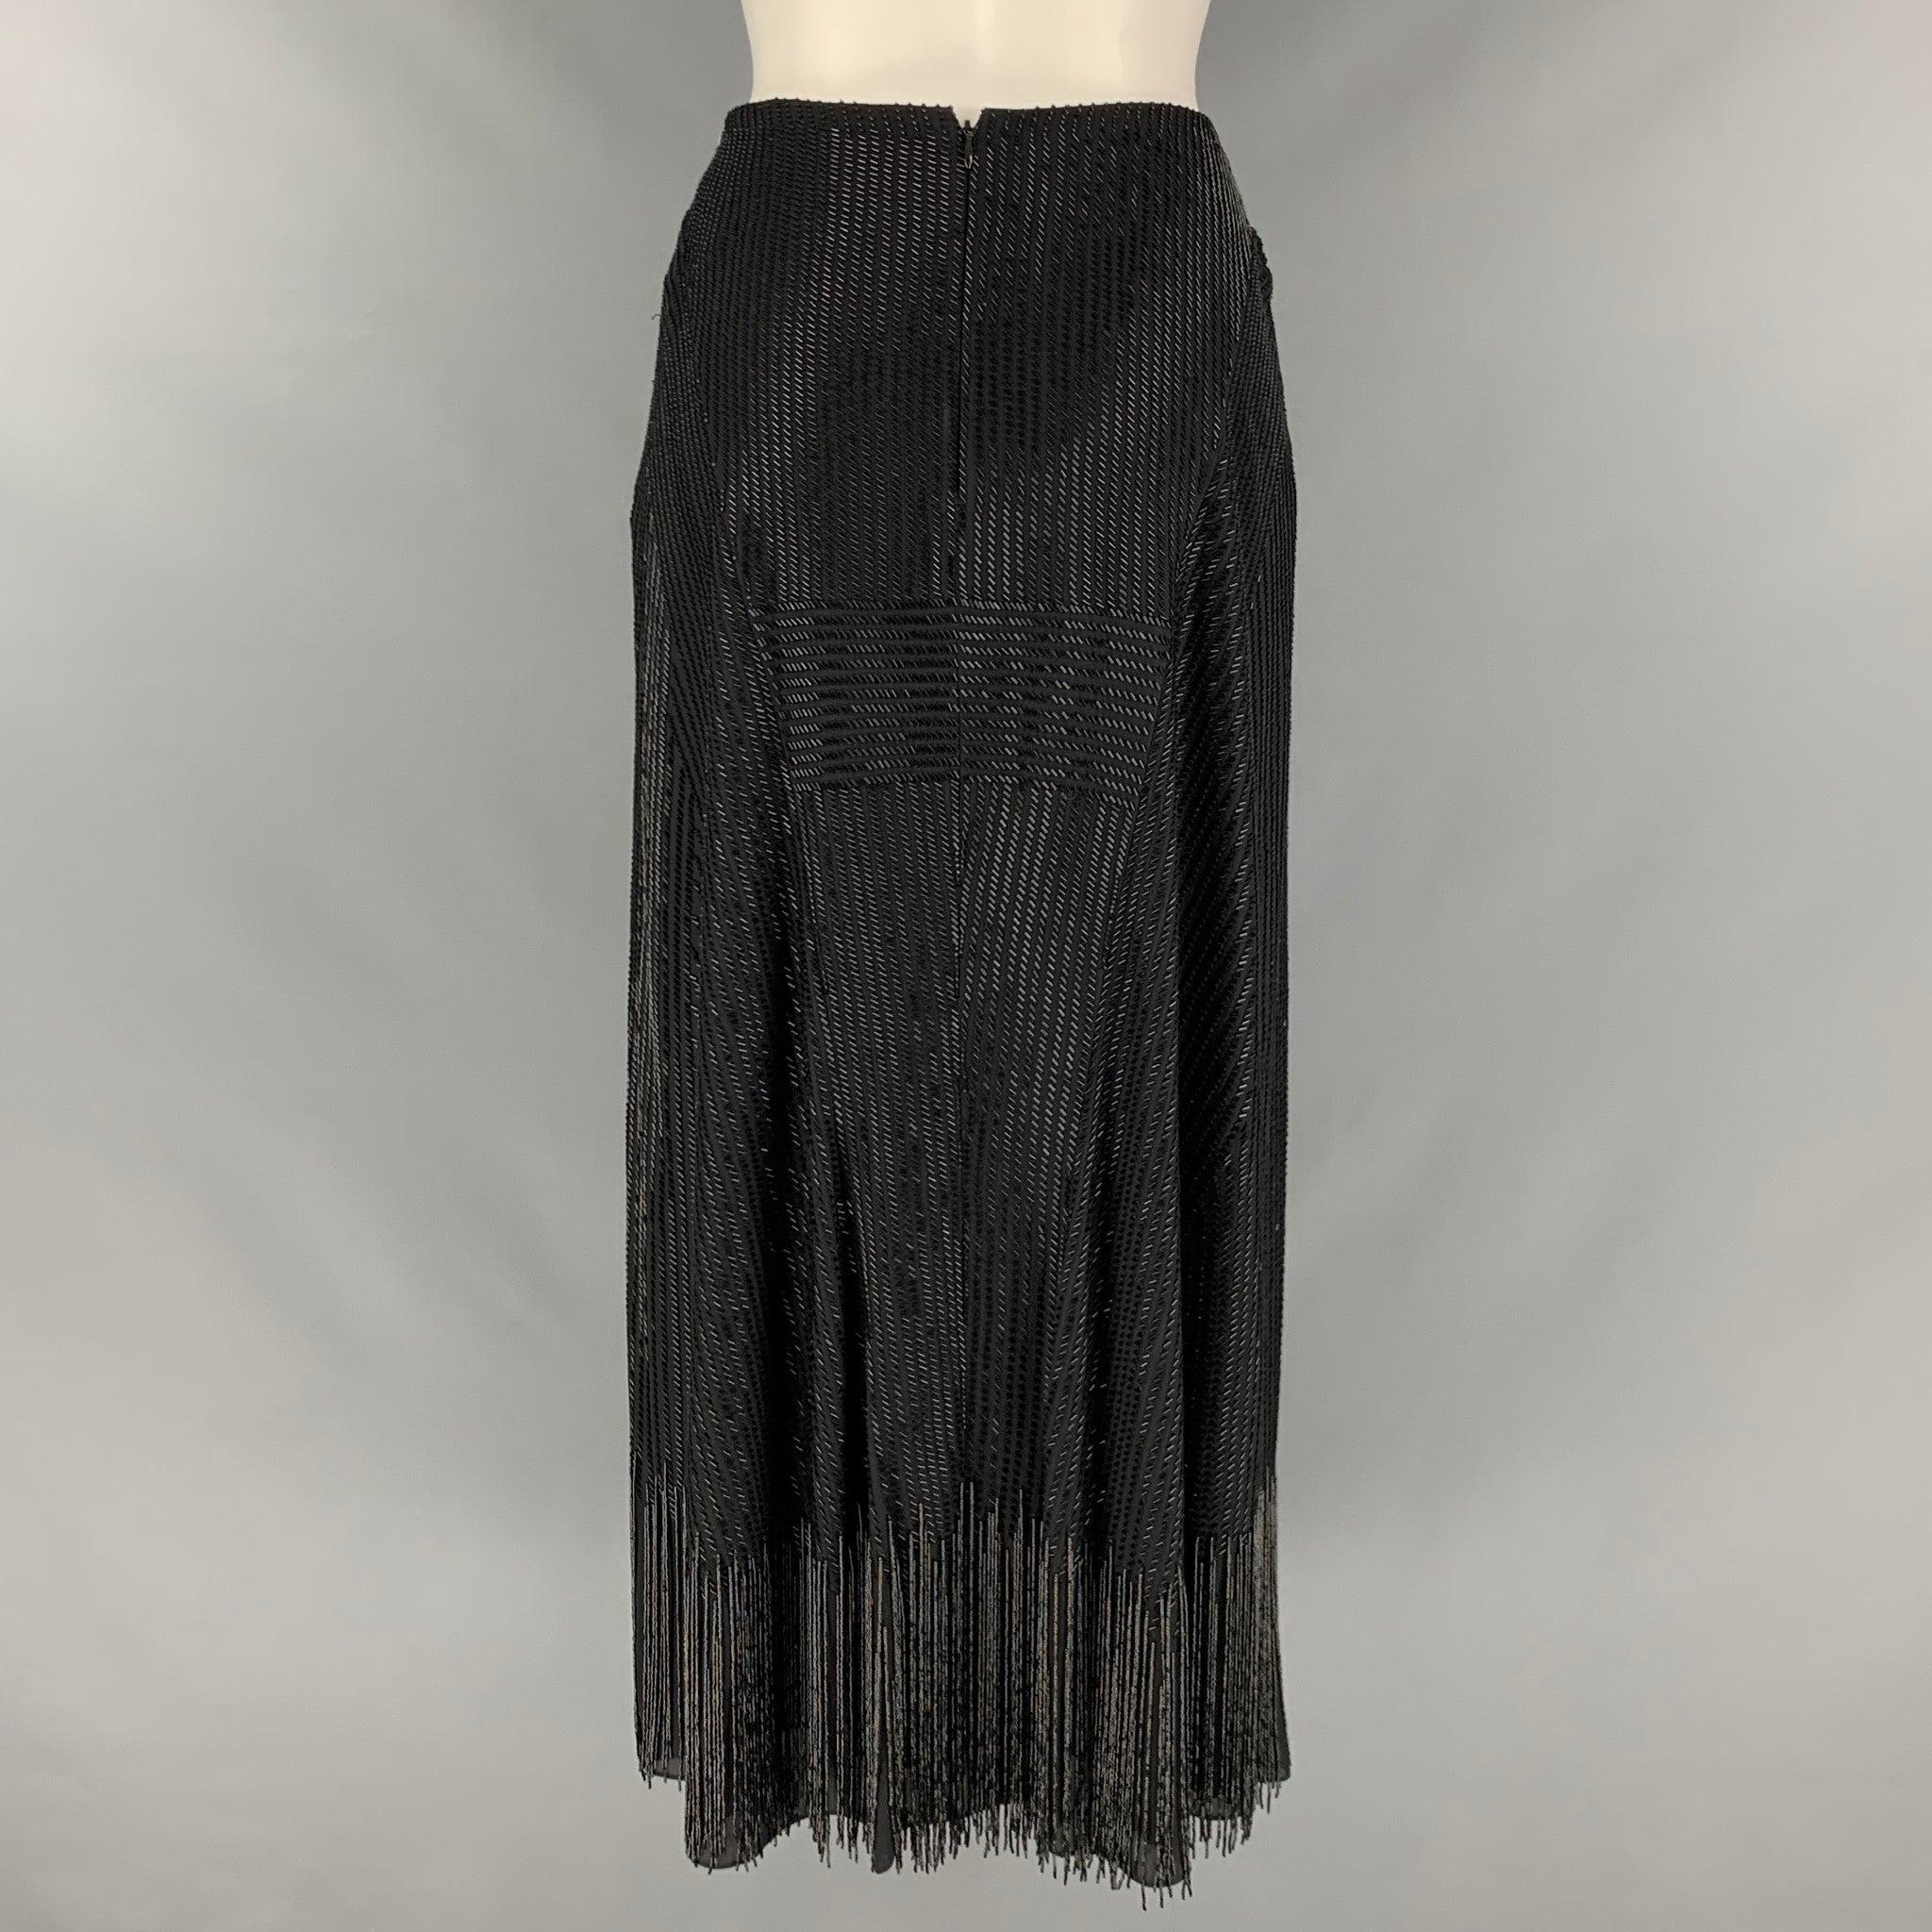 RALPH LAUREN Size 6 Black Silk Beaded Evening Long Skirt In Excellent Condition For Sale In San Francisco, CA